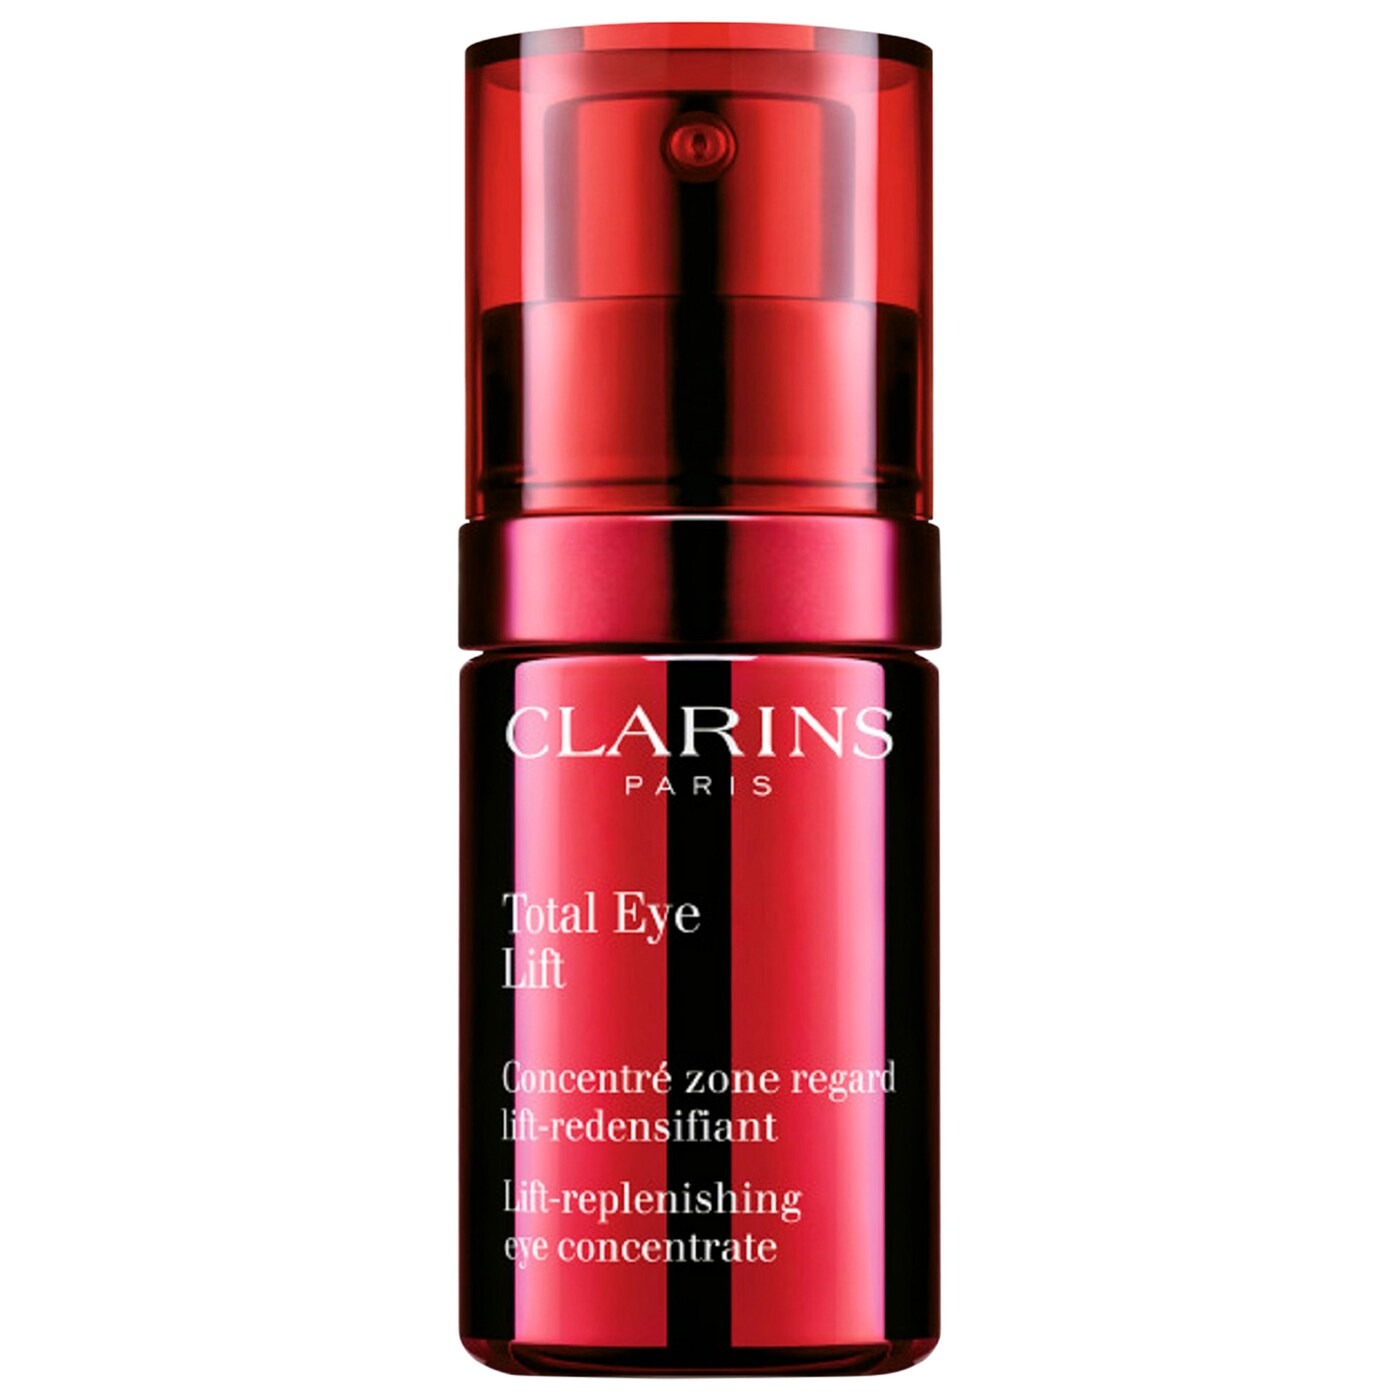 review-cryo-flash-mask-clarins-308384-16